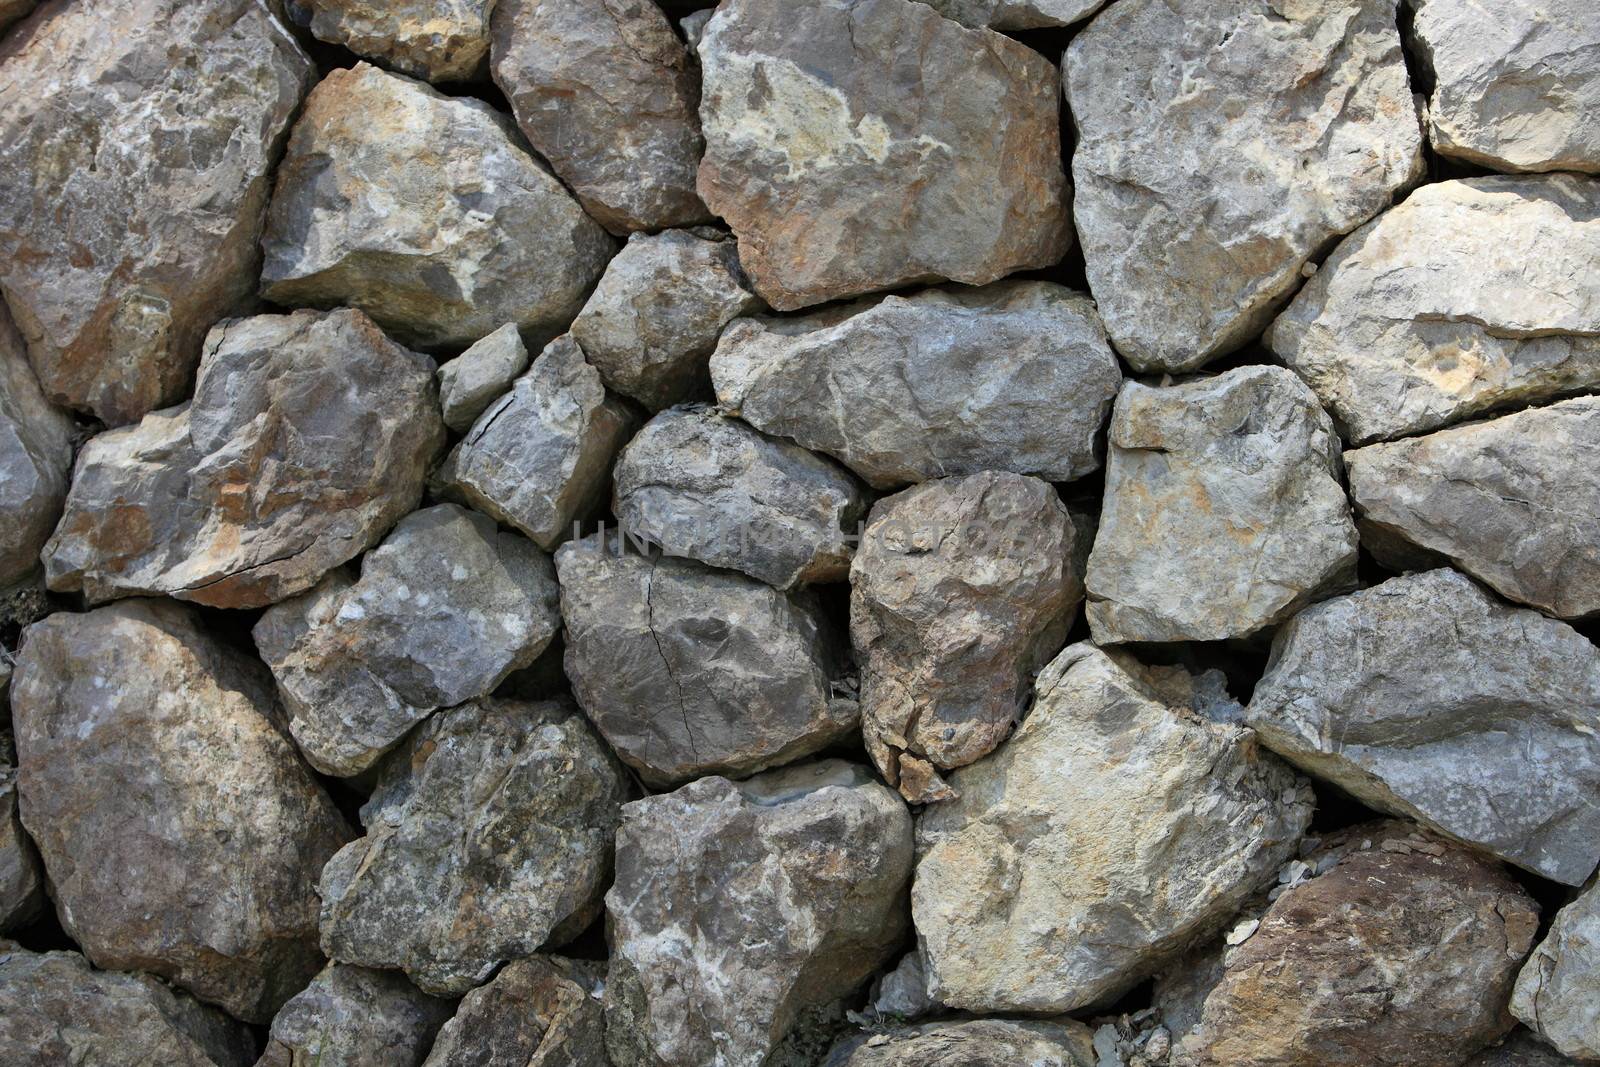 Background showing dry stone rock construction where rocks are interlocked using their natural shape for stability without using mortar